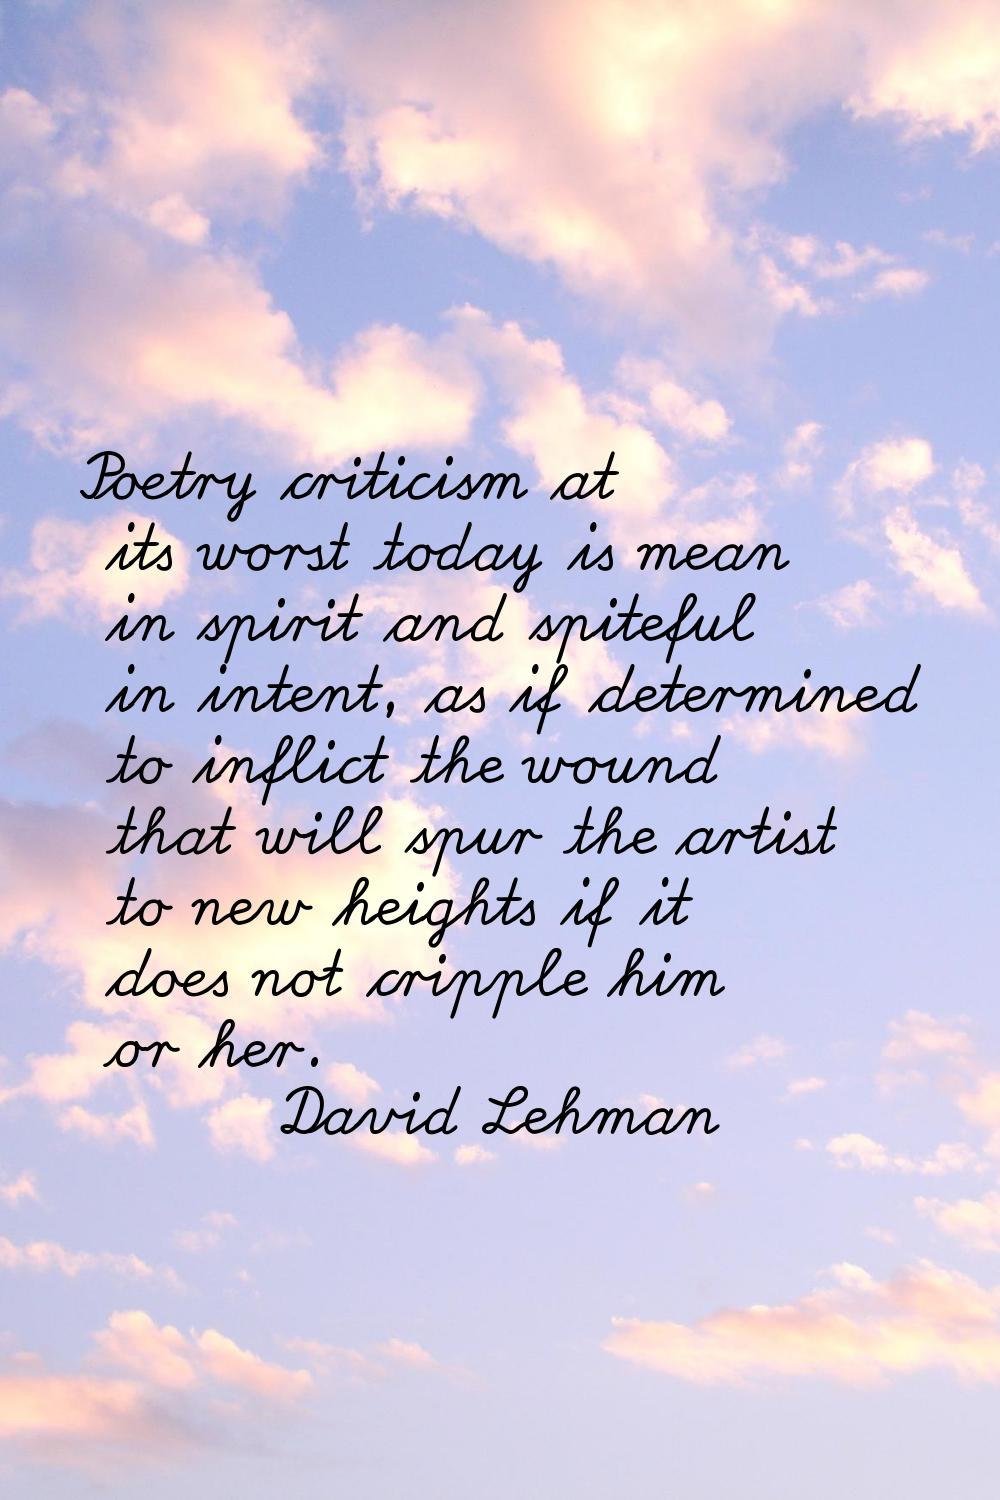 Poetry criticism at its worst today is mean in spirit and spiteful in intent, as if determined to i